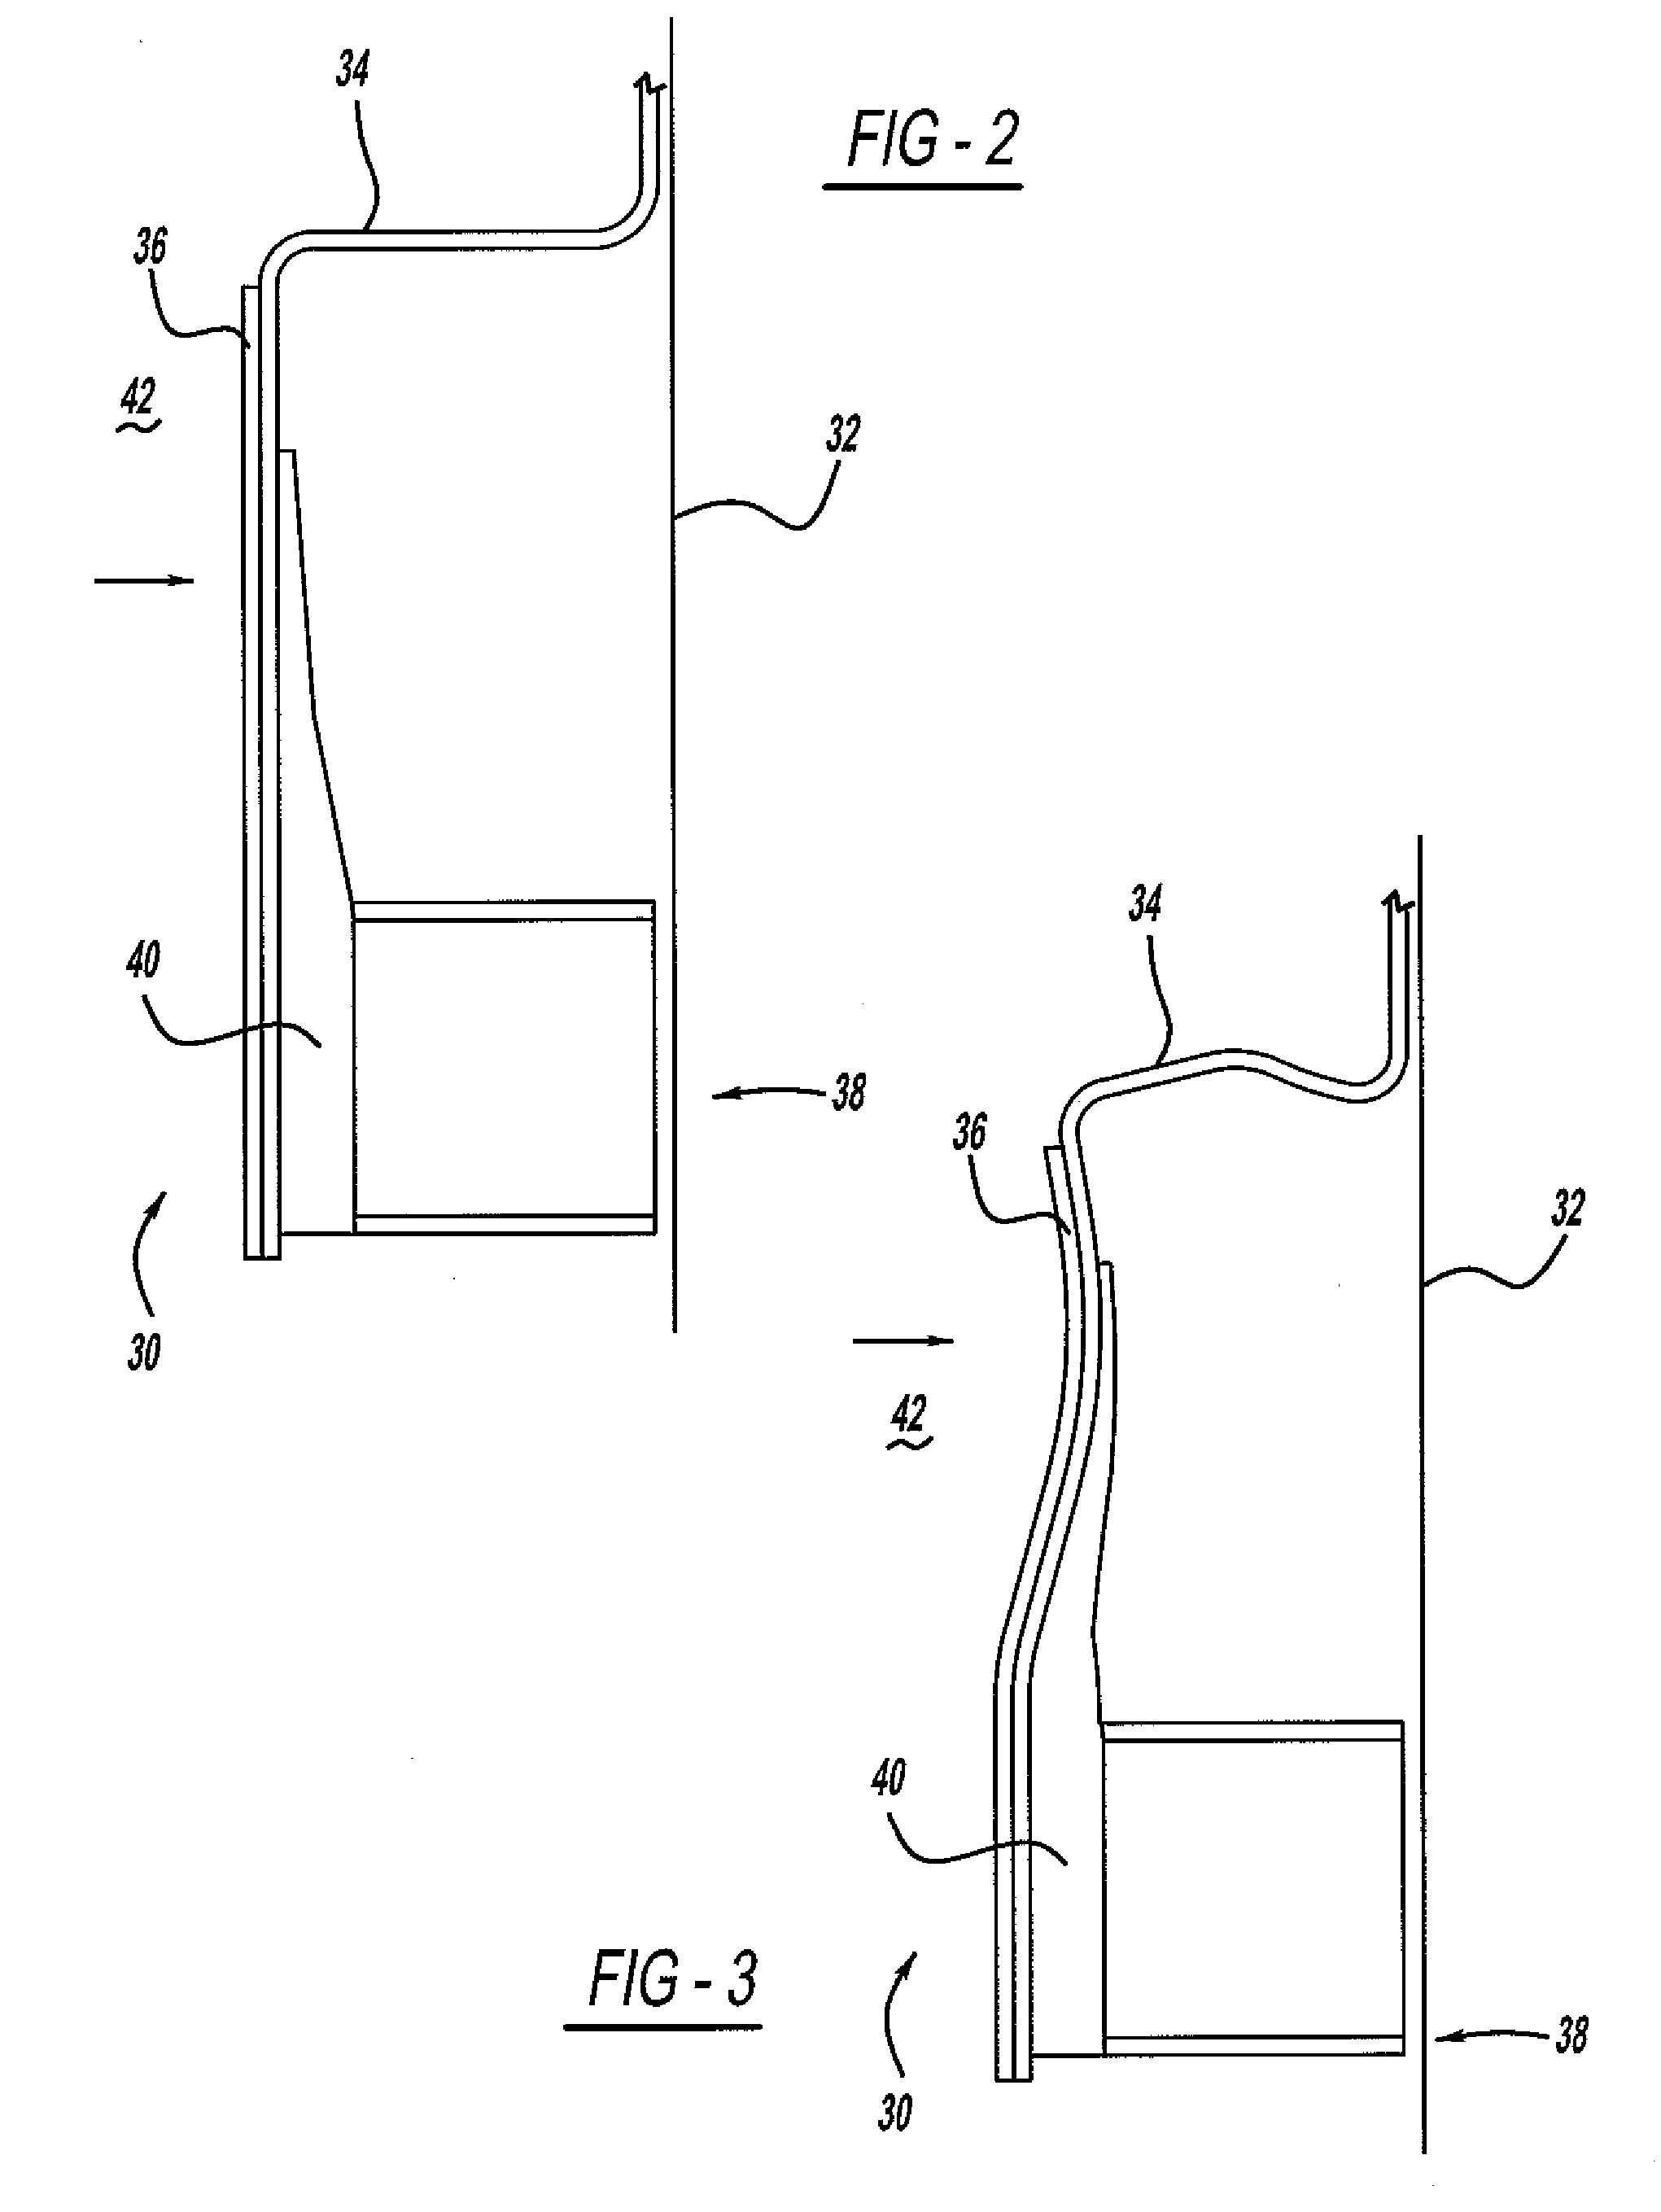 Door trim-integrated pelvic impact energy-absorbing construction for vehicle